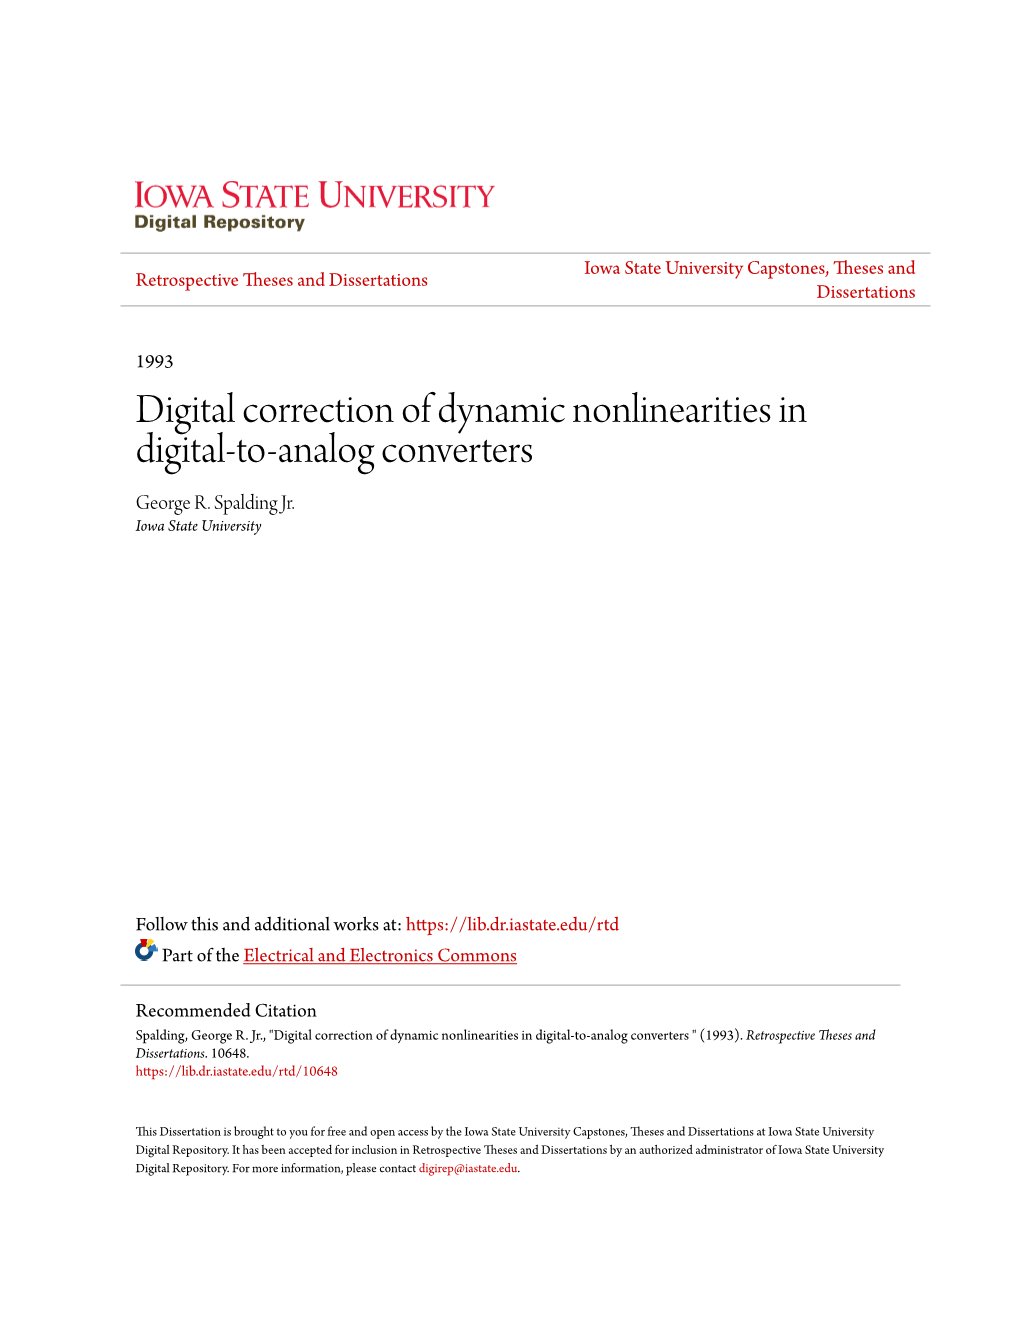 Digital Correction of Dynamic Nonlinearities in Digital-To-Analog Converters George R